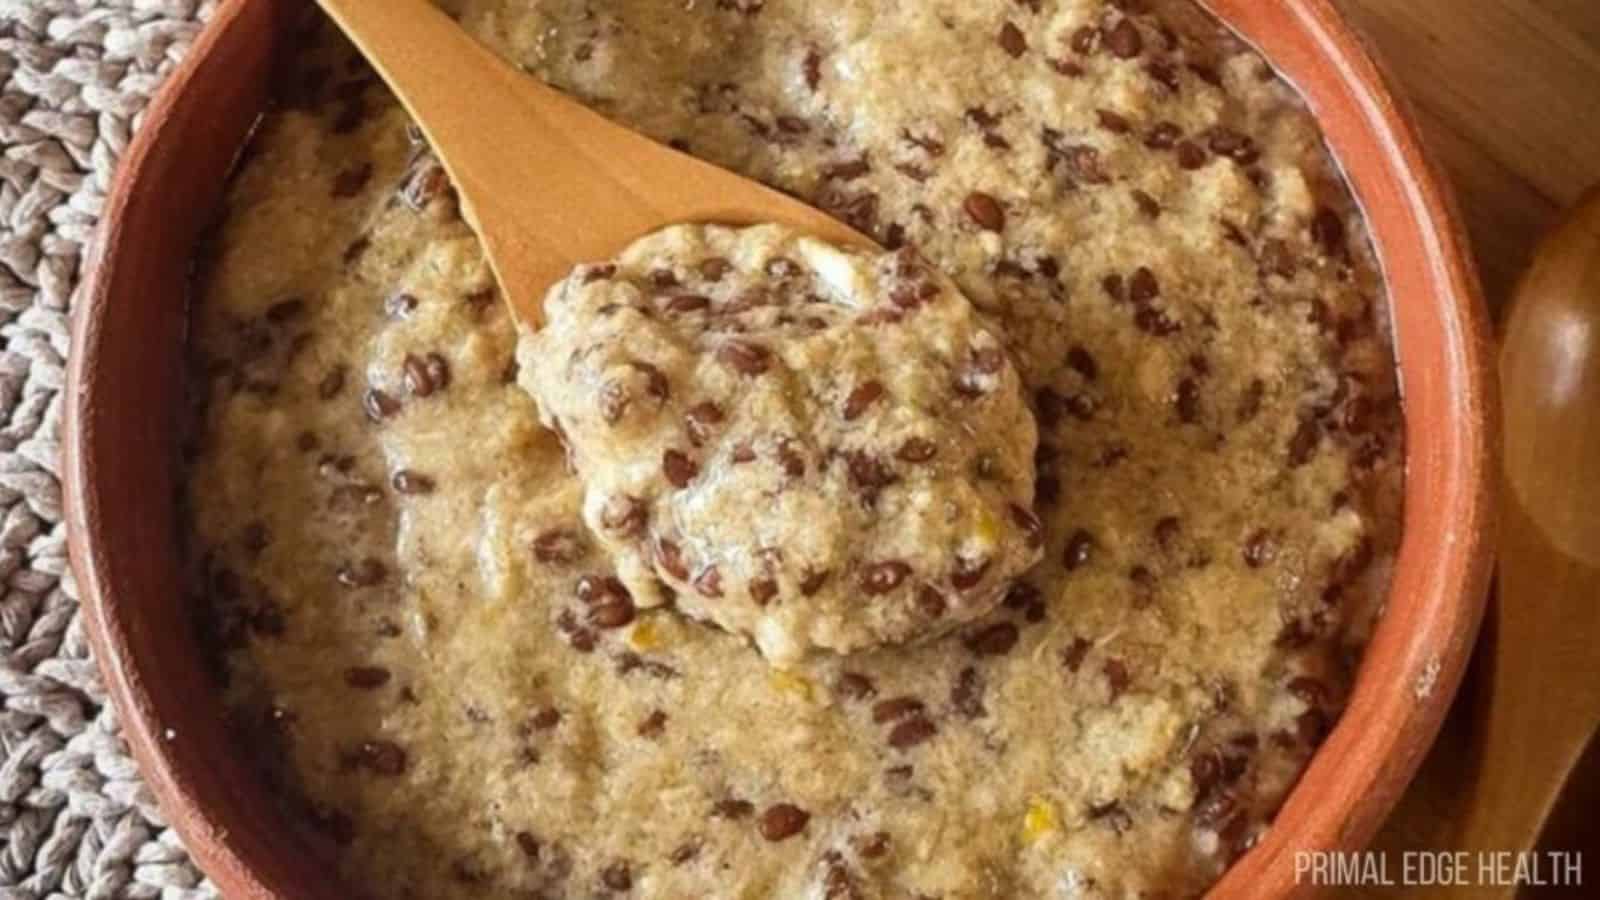 <p>Need a warm and comforting breakfast? This low-carb porridge is ready in minutes and offers a cozy start to your day.<br><strong>Get the Recipe: </strong><a href="https://www.primaledgehealth.com/keto-breakfast-cereal/?utm_source=msn&utm_medium=page&utm_campaign=msn">Low-Carb Porridge</a></p>